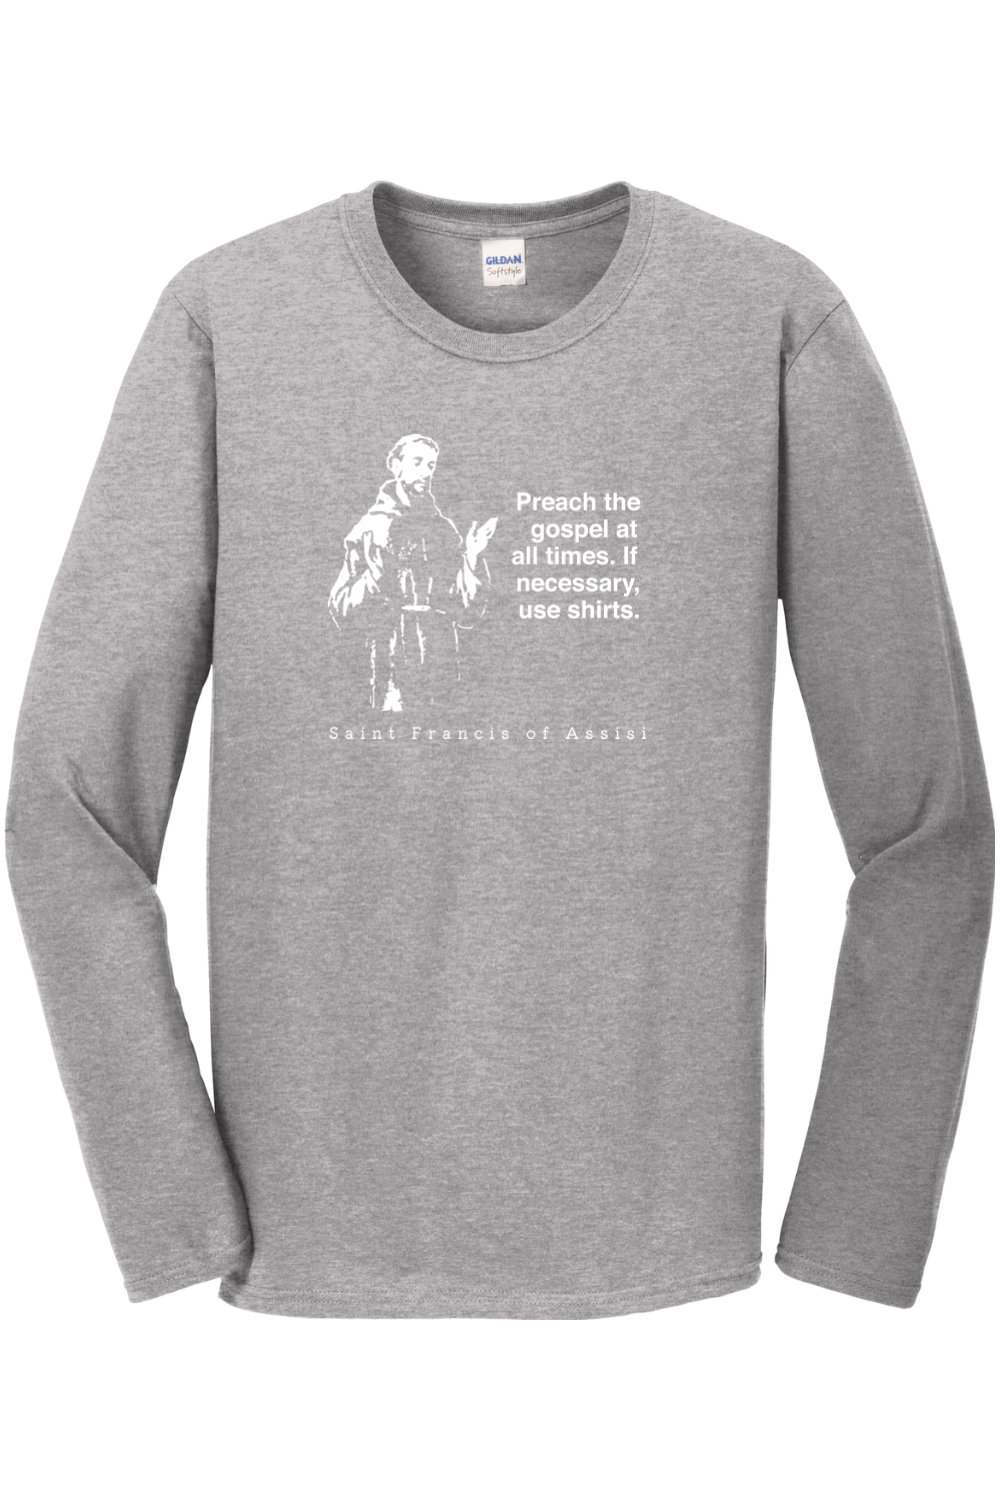 Preach the Gospel - St Francis of Assisi Long Sleeve